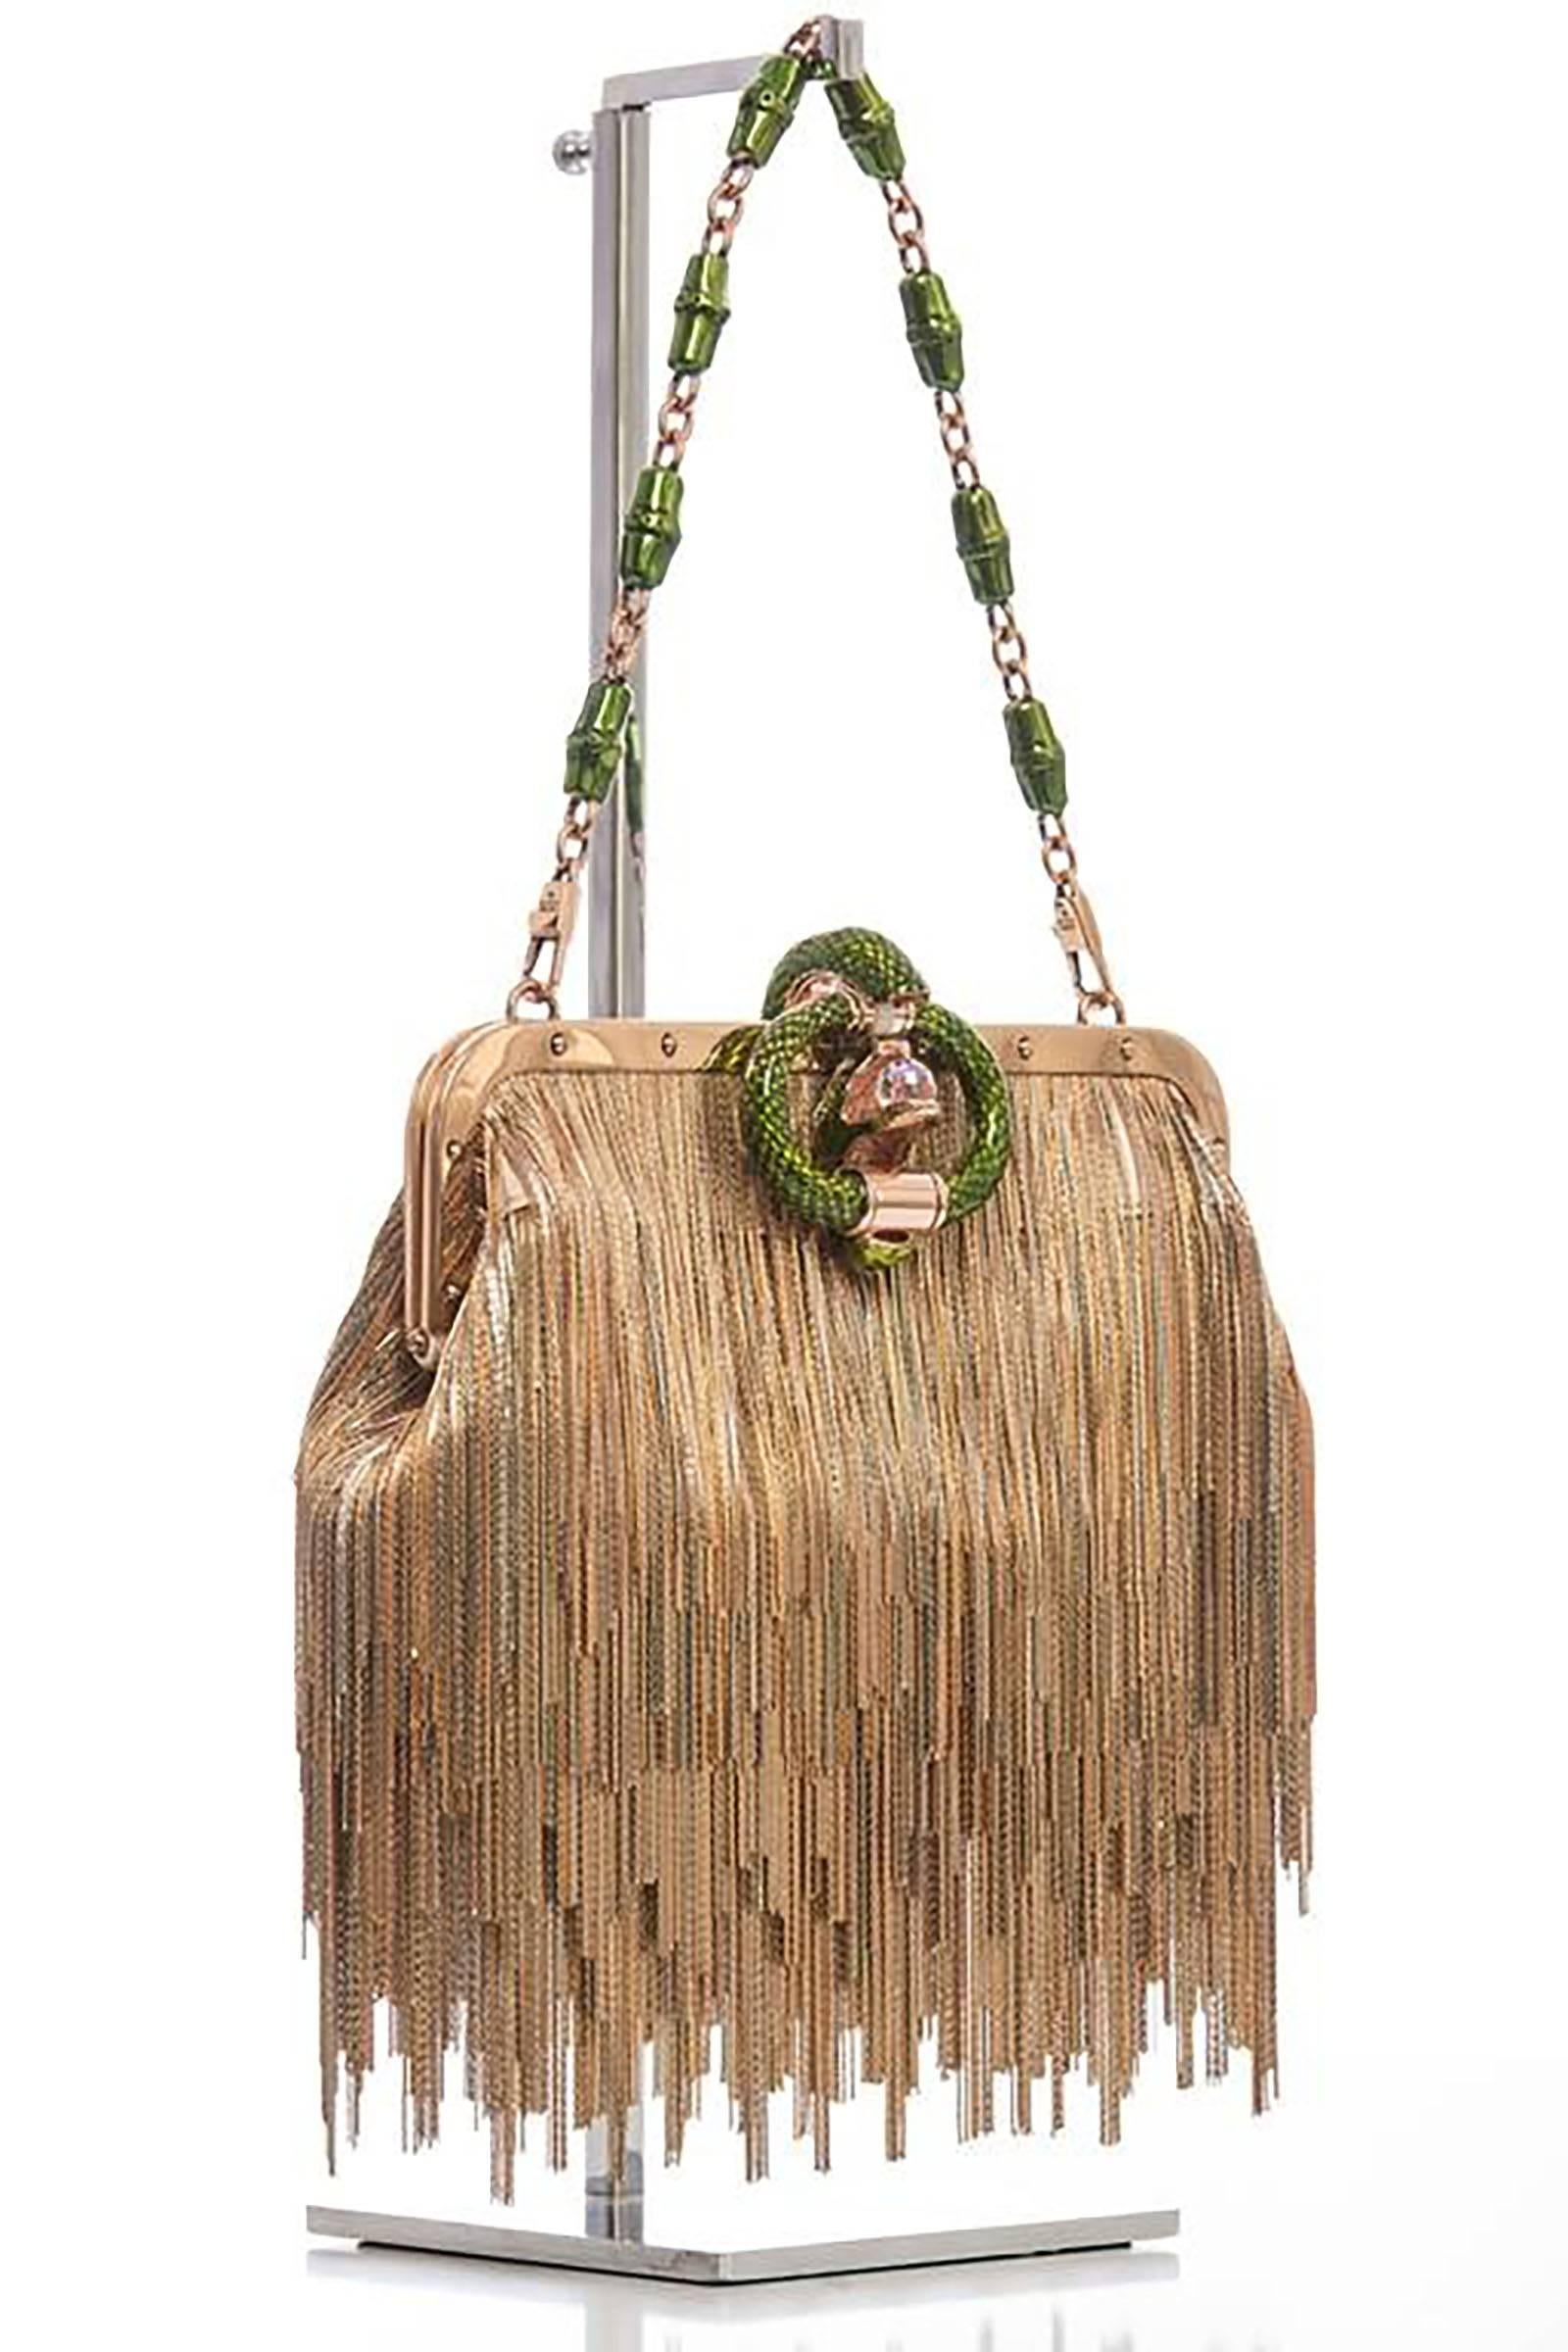 Tom Ford for Gucci, Spring / Summer 2004 Champagne satin, fringe dragon series evening bag with gold-tone hardware, single shoulder strap with bamboo chain-link accent, gold-tone fringe embellishment throughout.  Inside champagne satin lining,